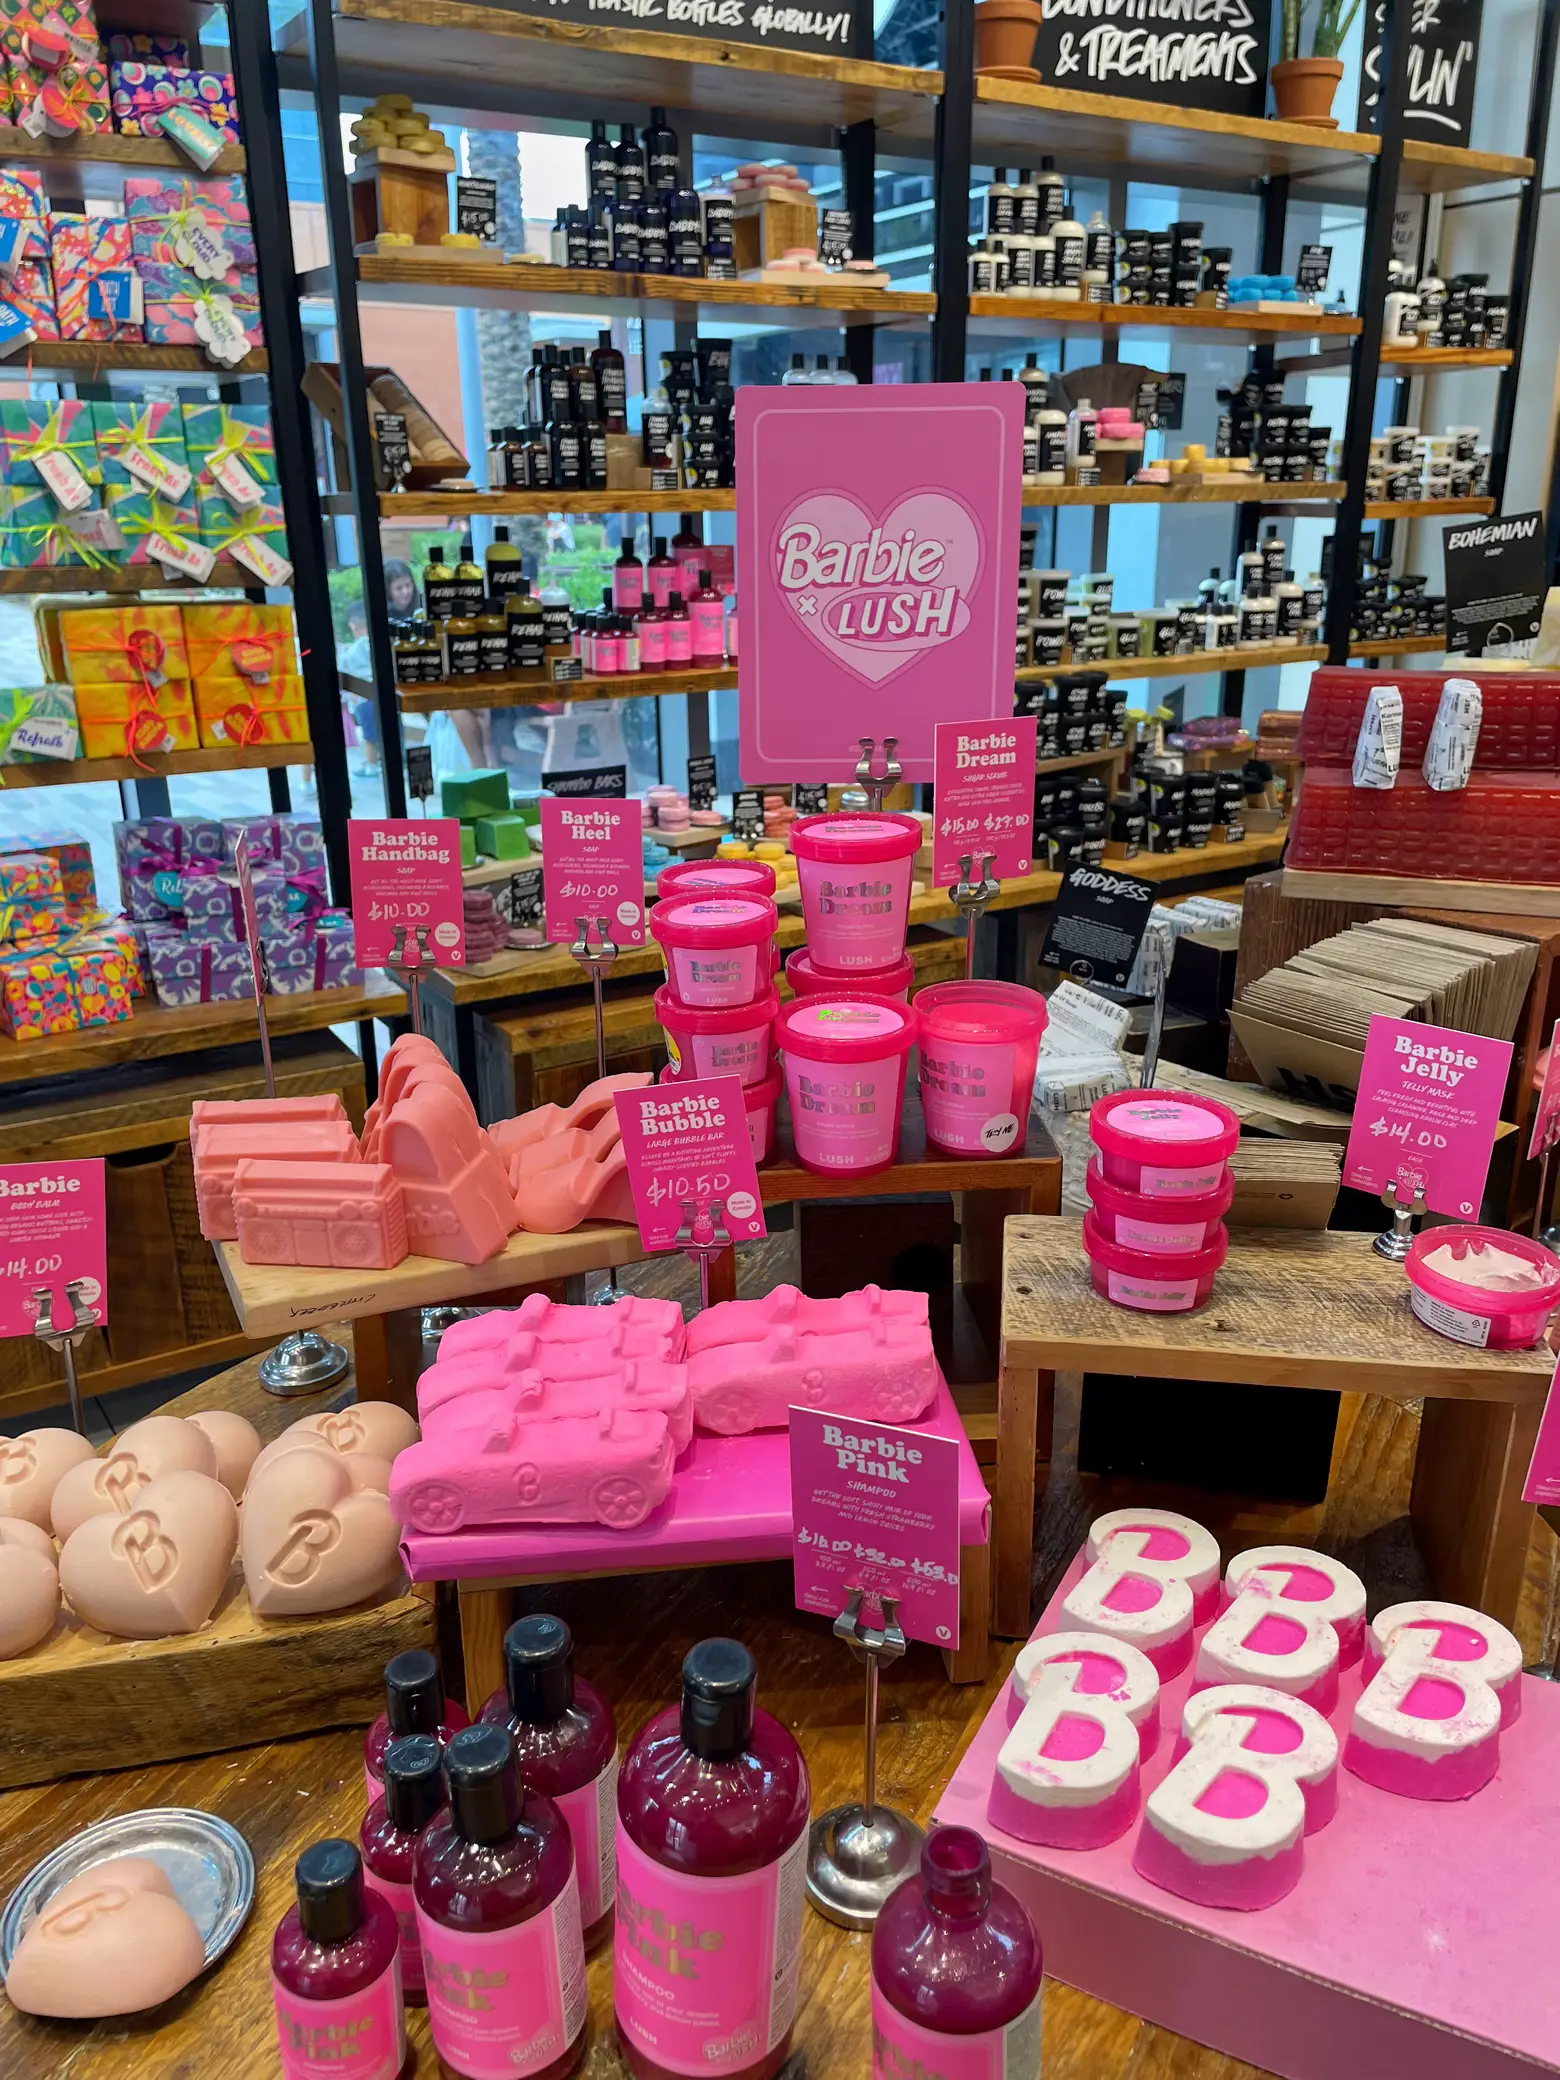 Lush's Barbie Collection: Shop the Products